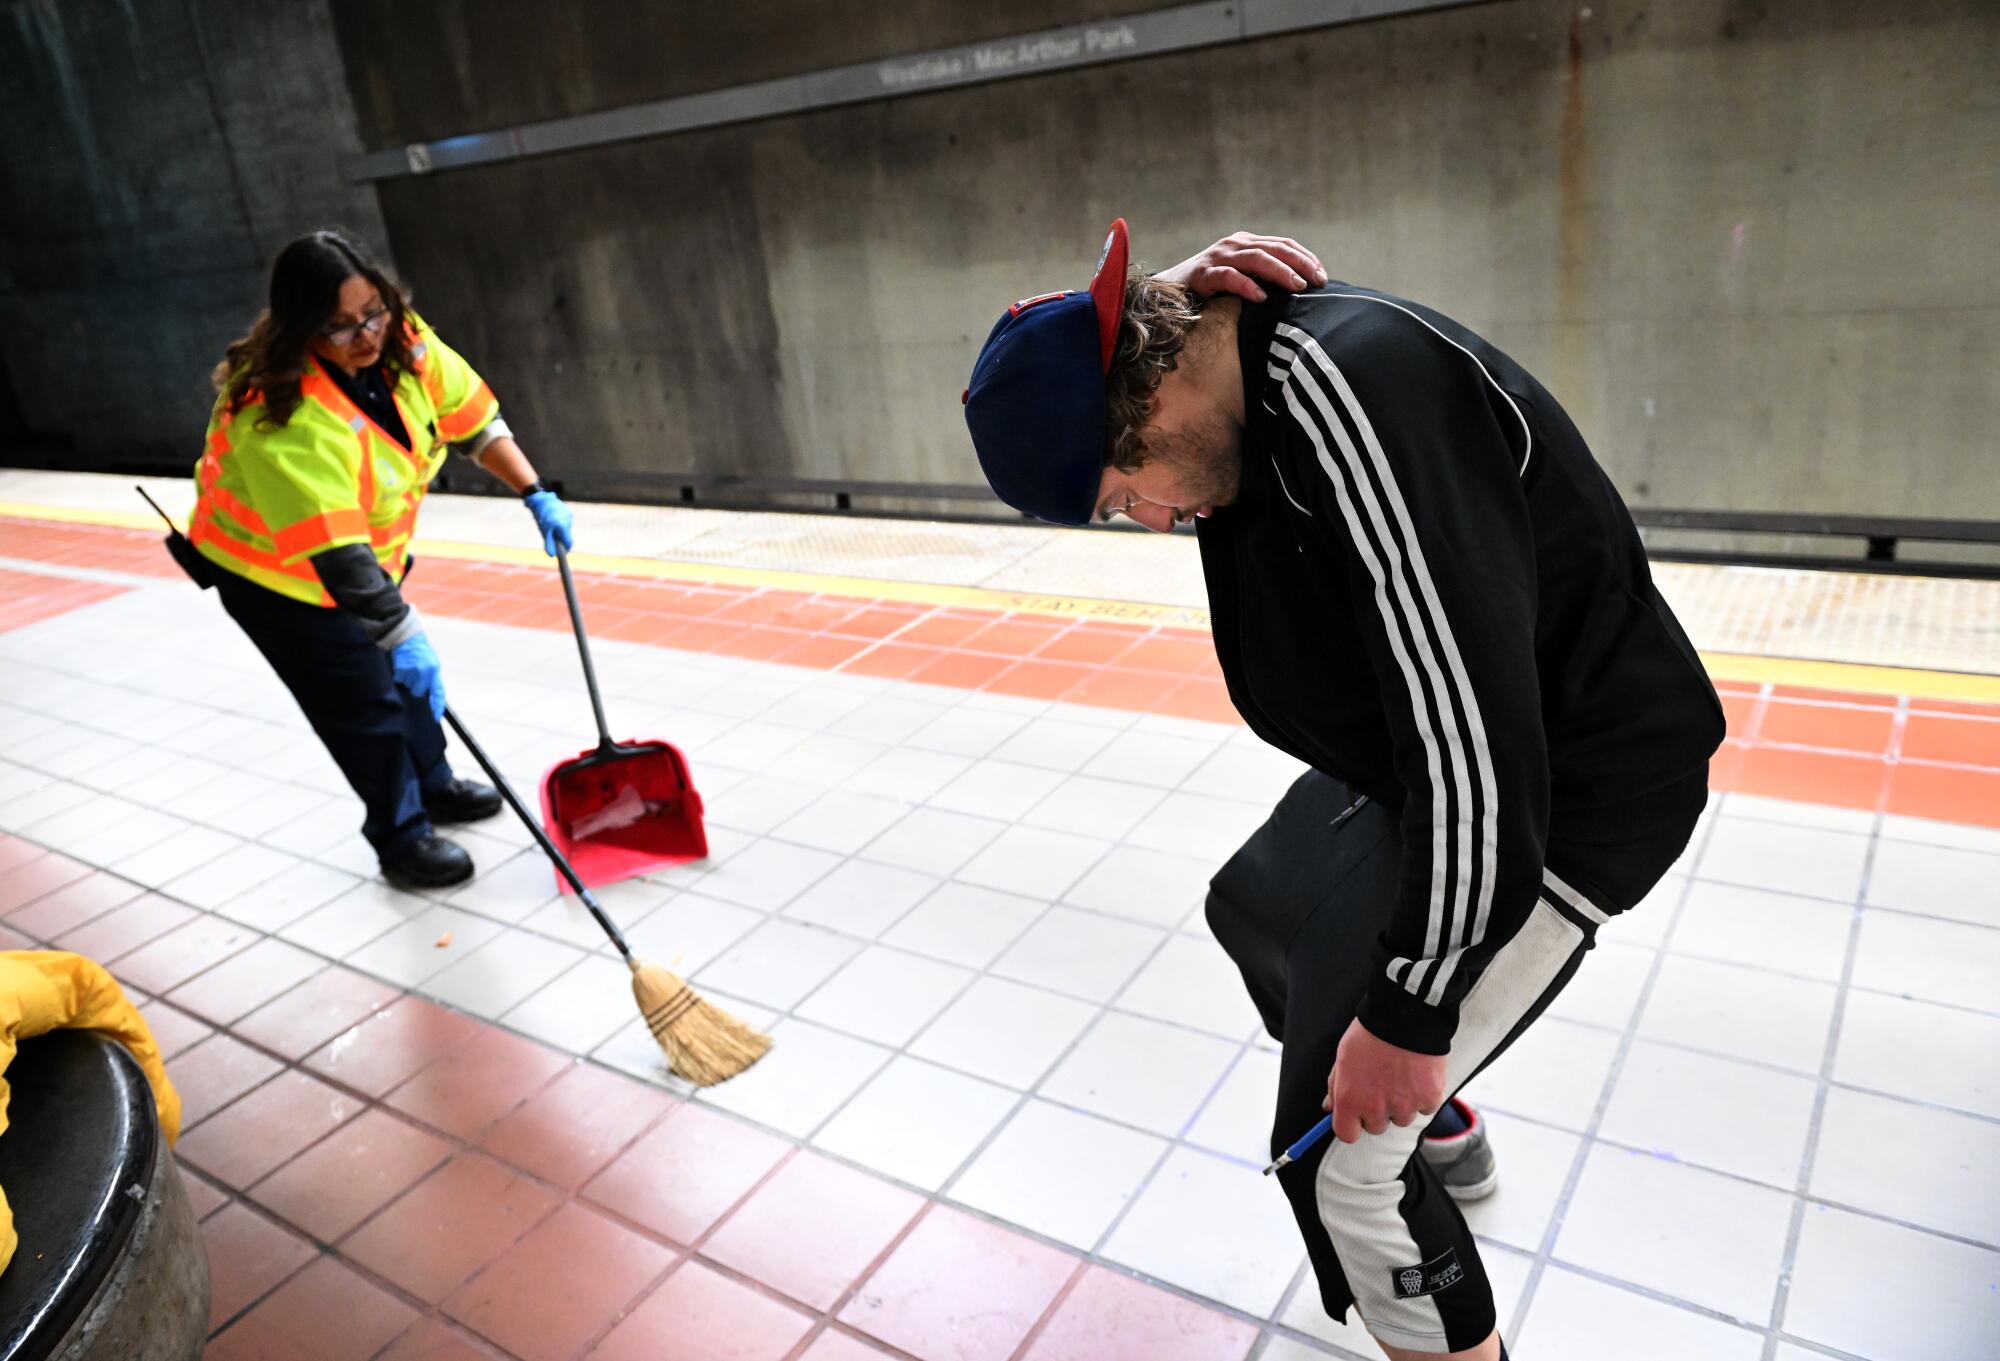 A man in a track suit, right, stands slumped while a woman wearing a neon vest sweeps a subway platform.